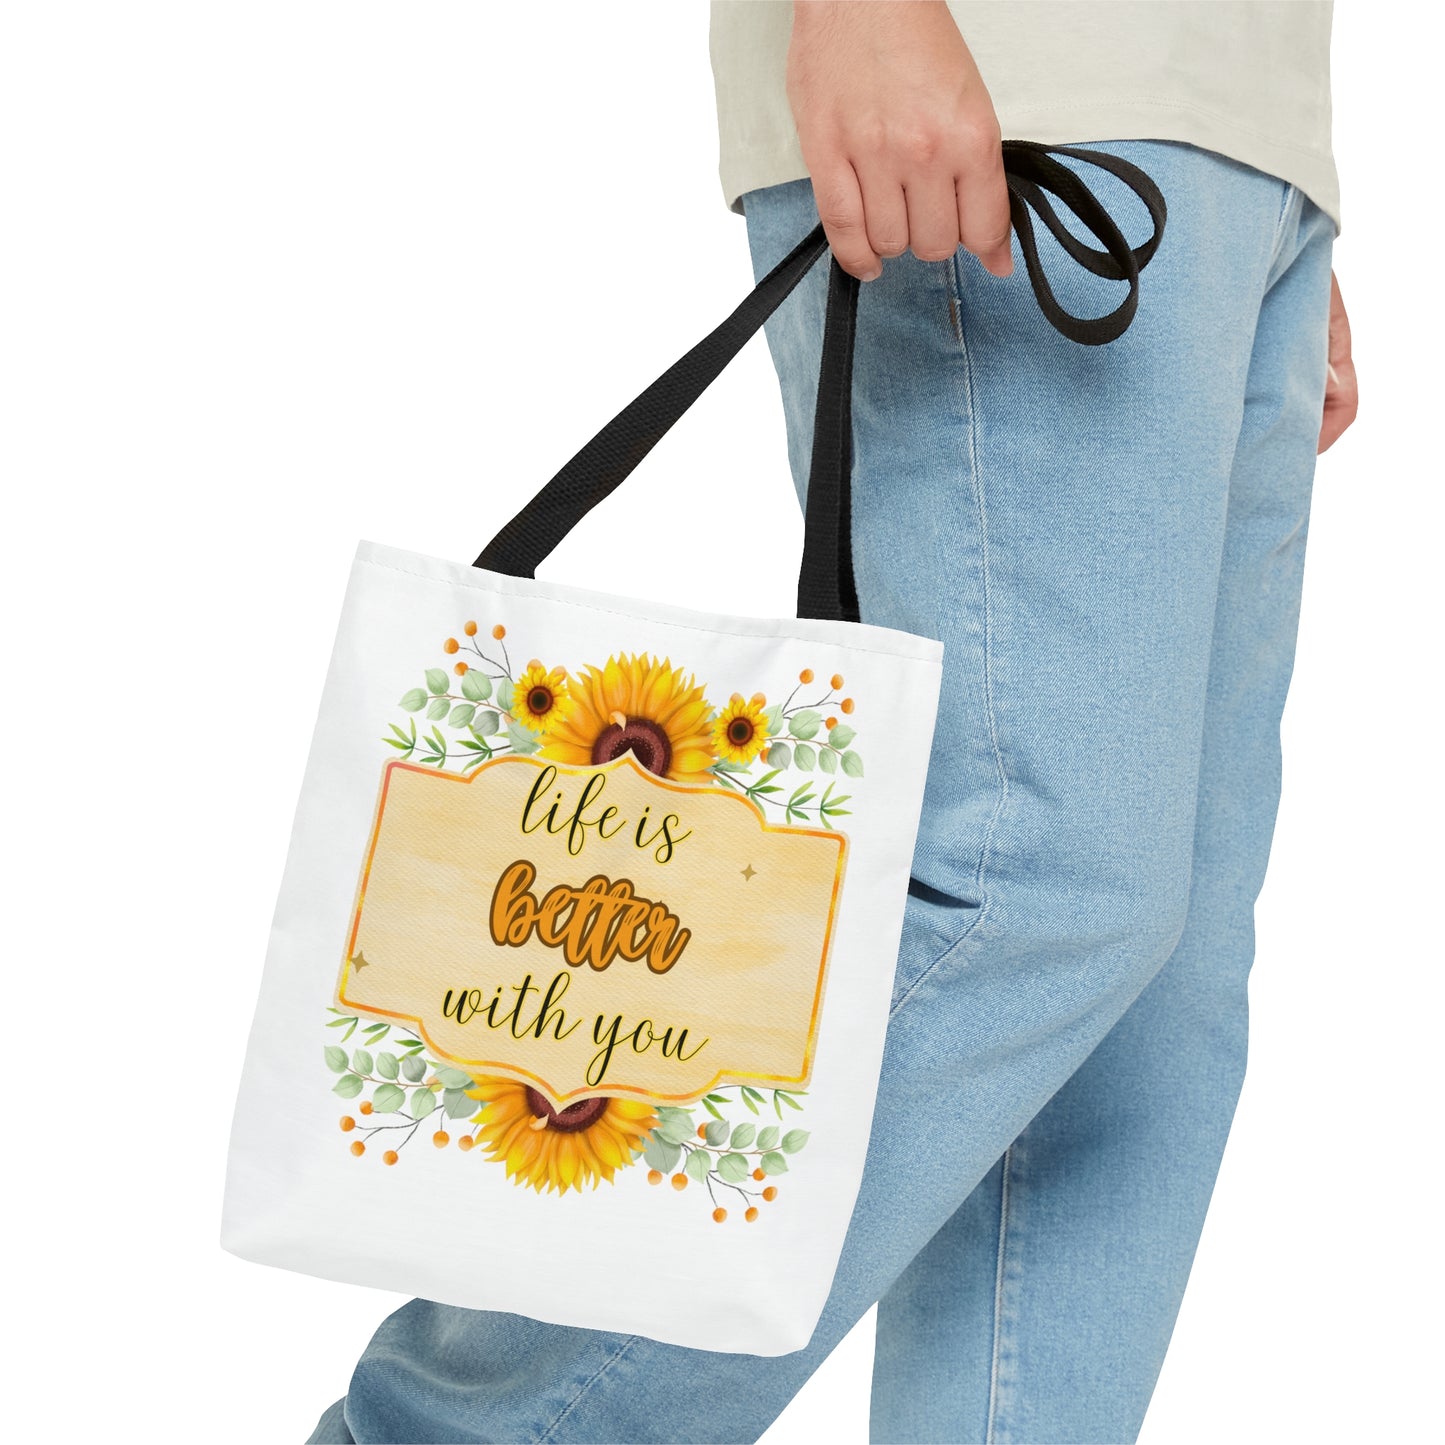 Tote Bag - Love and freedom - 08